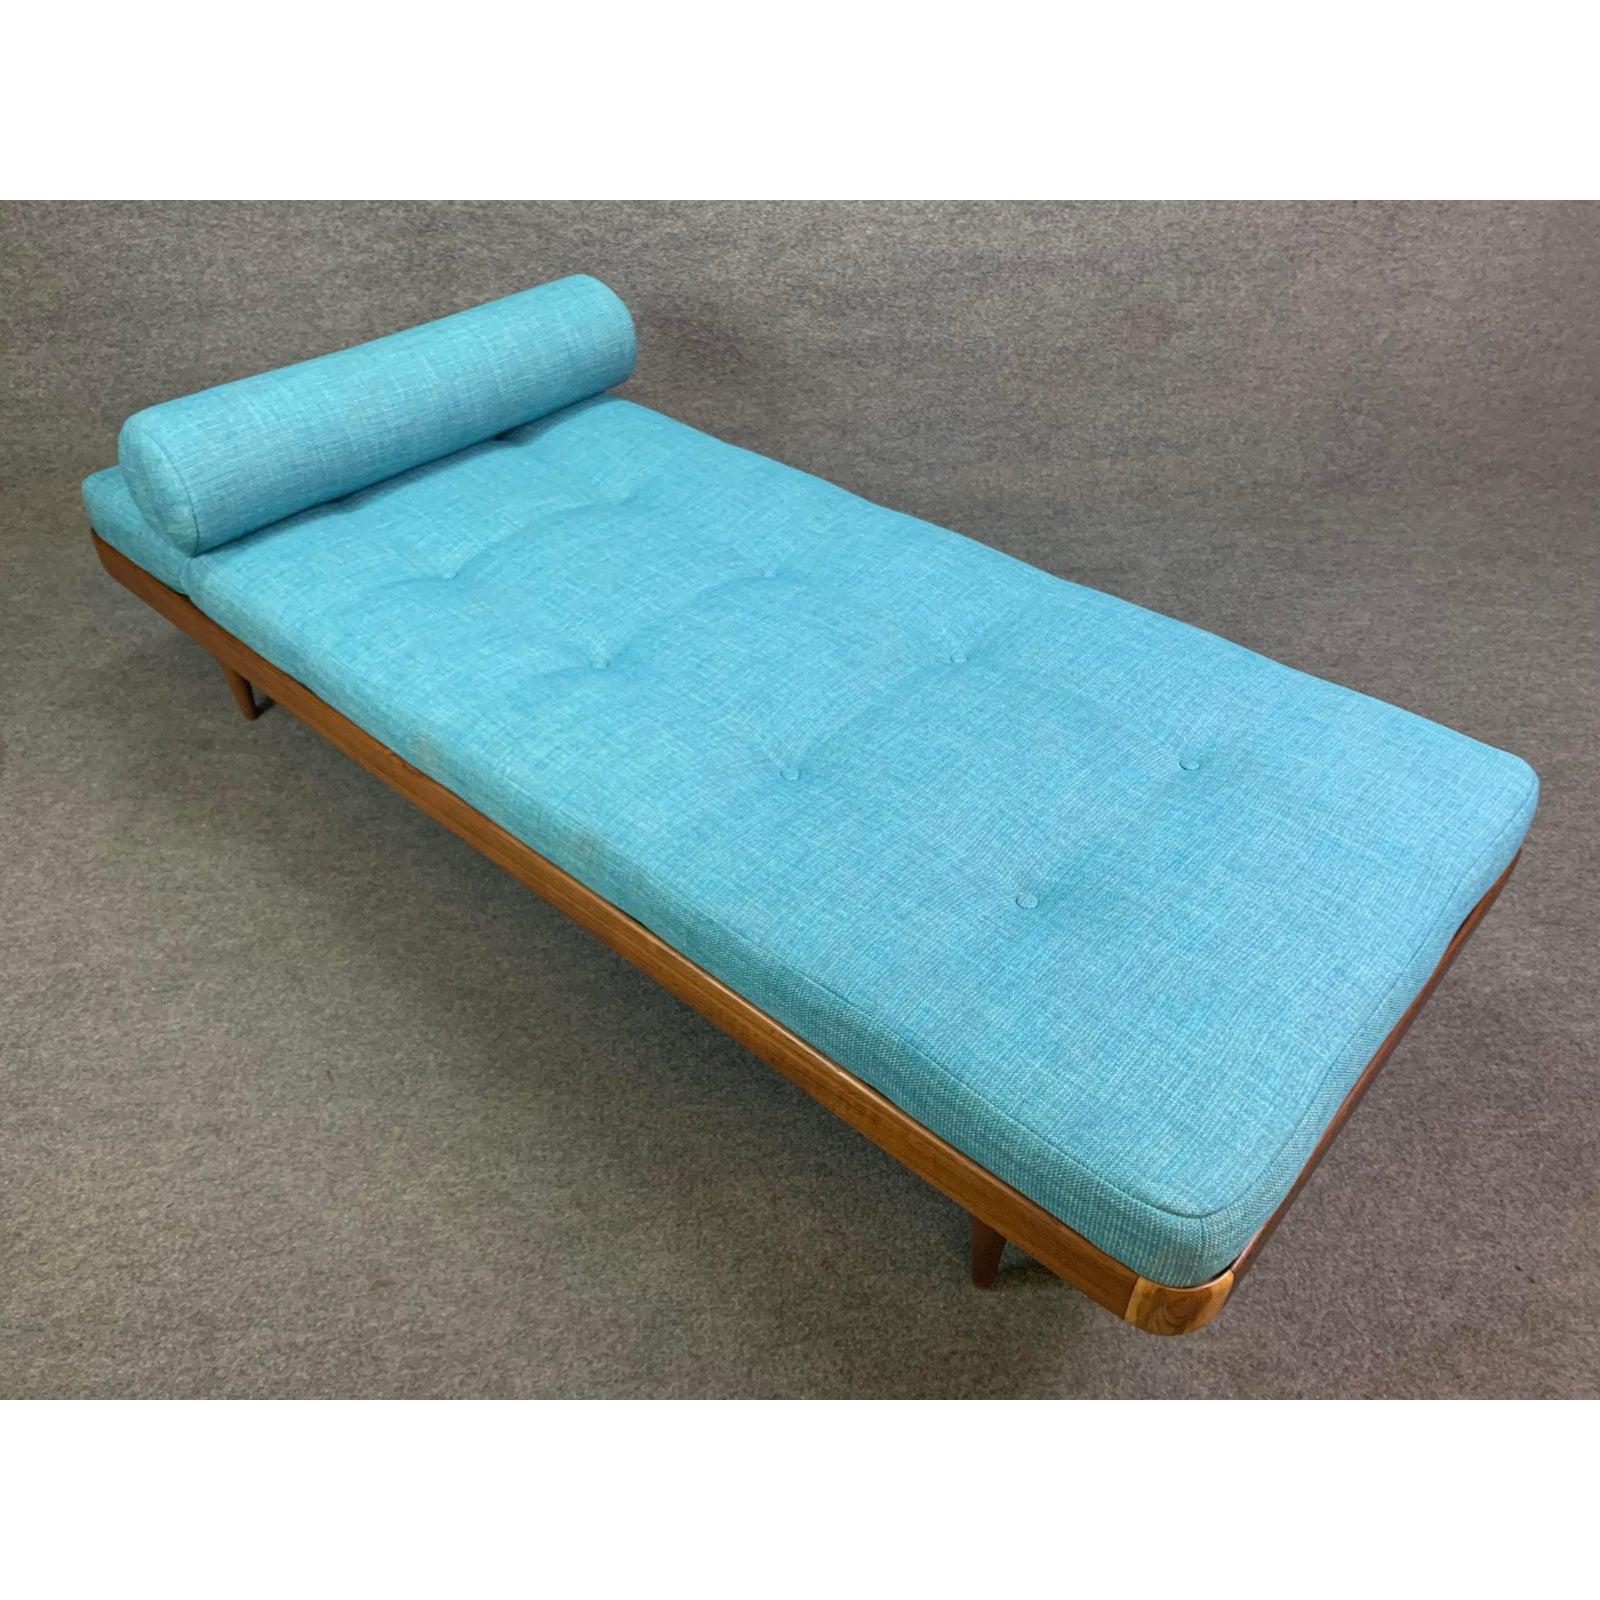 Here s a beautiful Scandinavian Modern daybed with a teak frame that was recently imported from Denmark to California before its restoration.
This lovely and comfortable piece features a solid teak frame with solid wood slats and legs and a brand